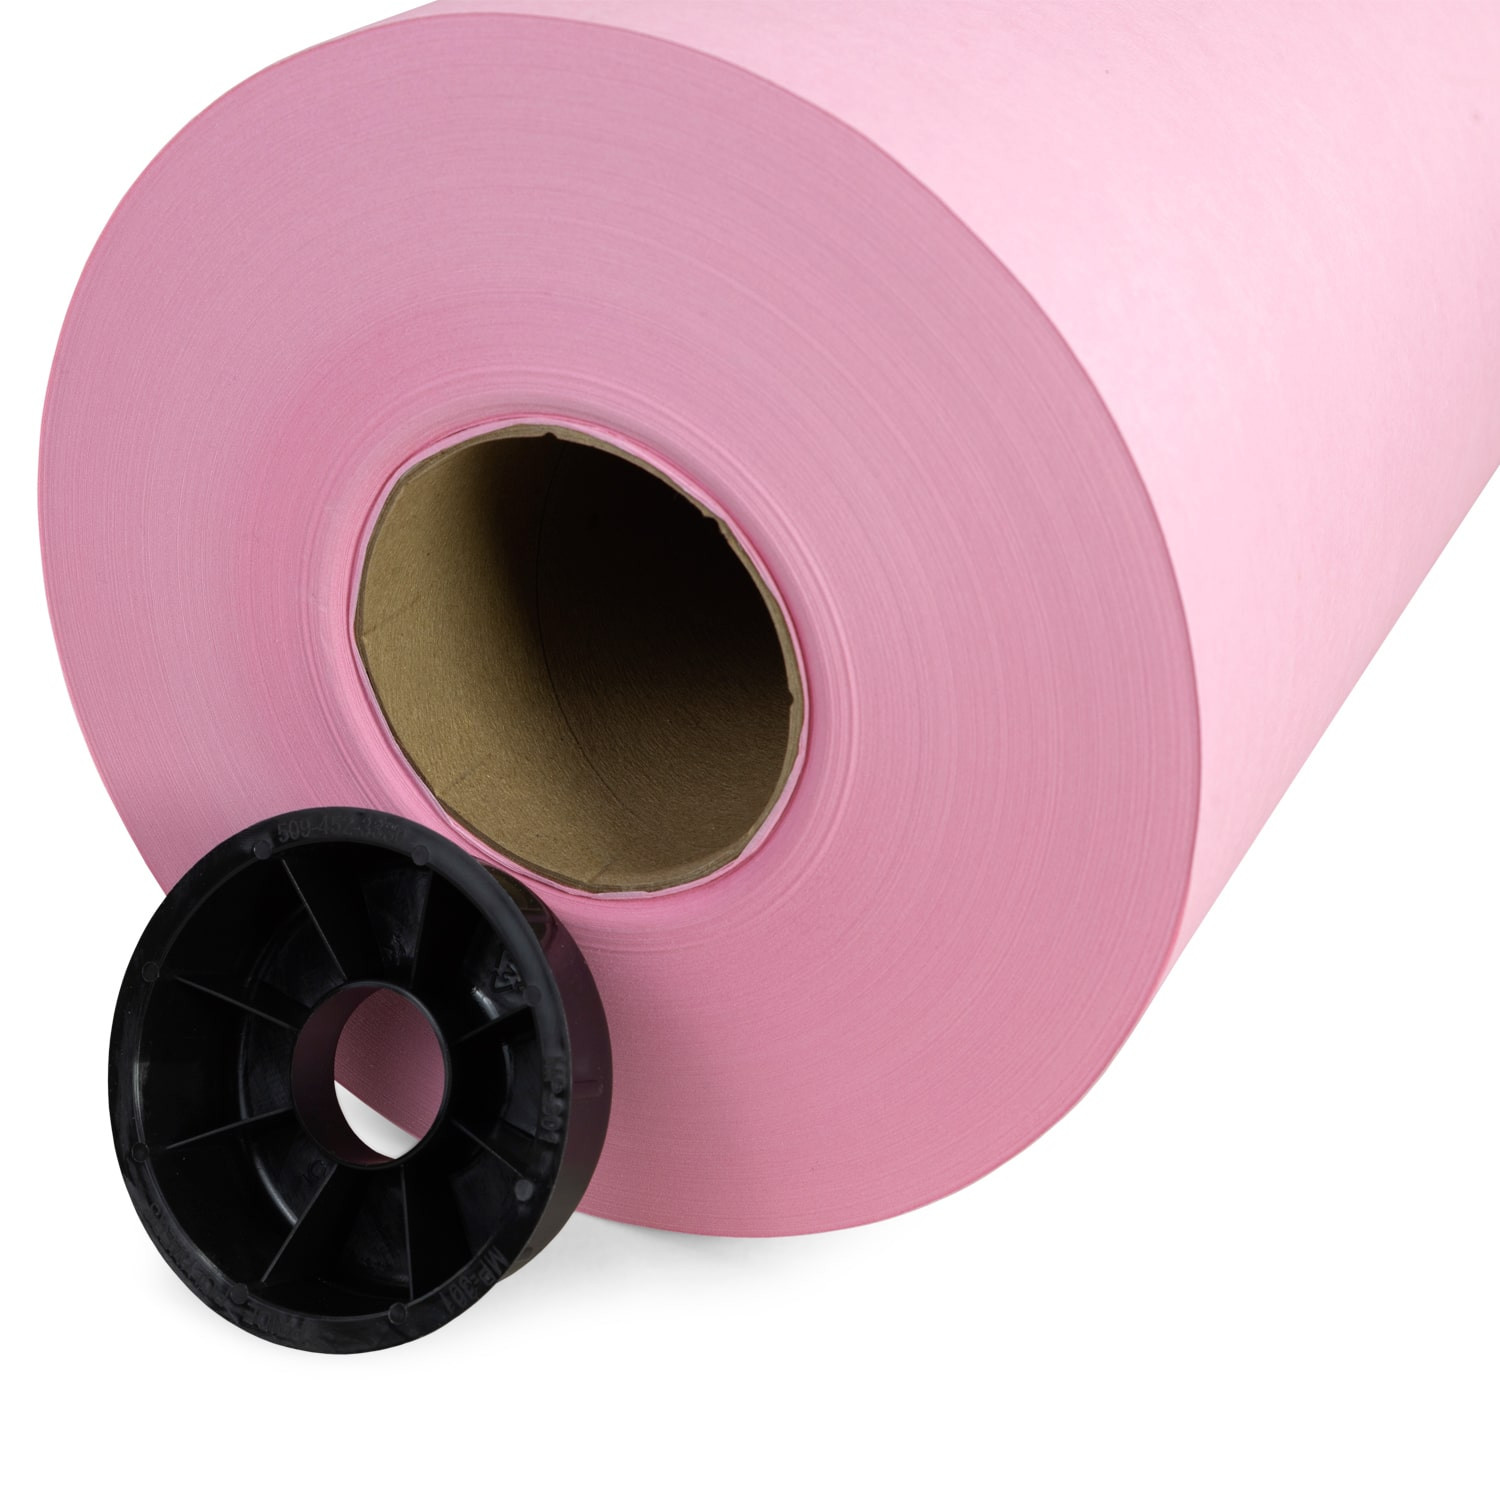 18 x 180 Pink Butcher Paper Roll for Cooking, Smoking and Packing